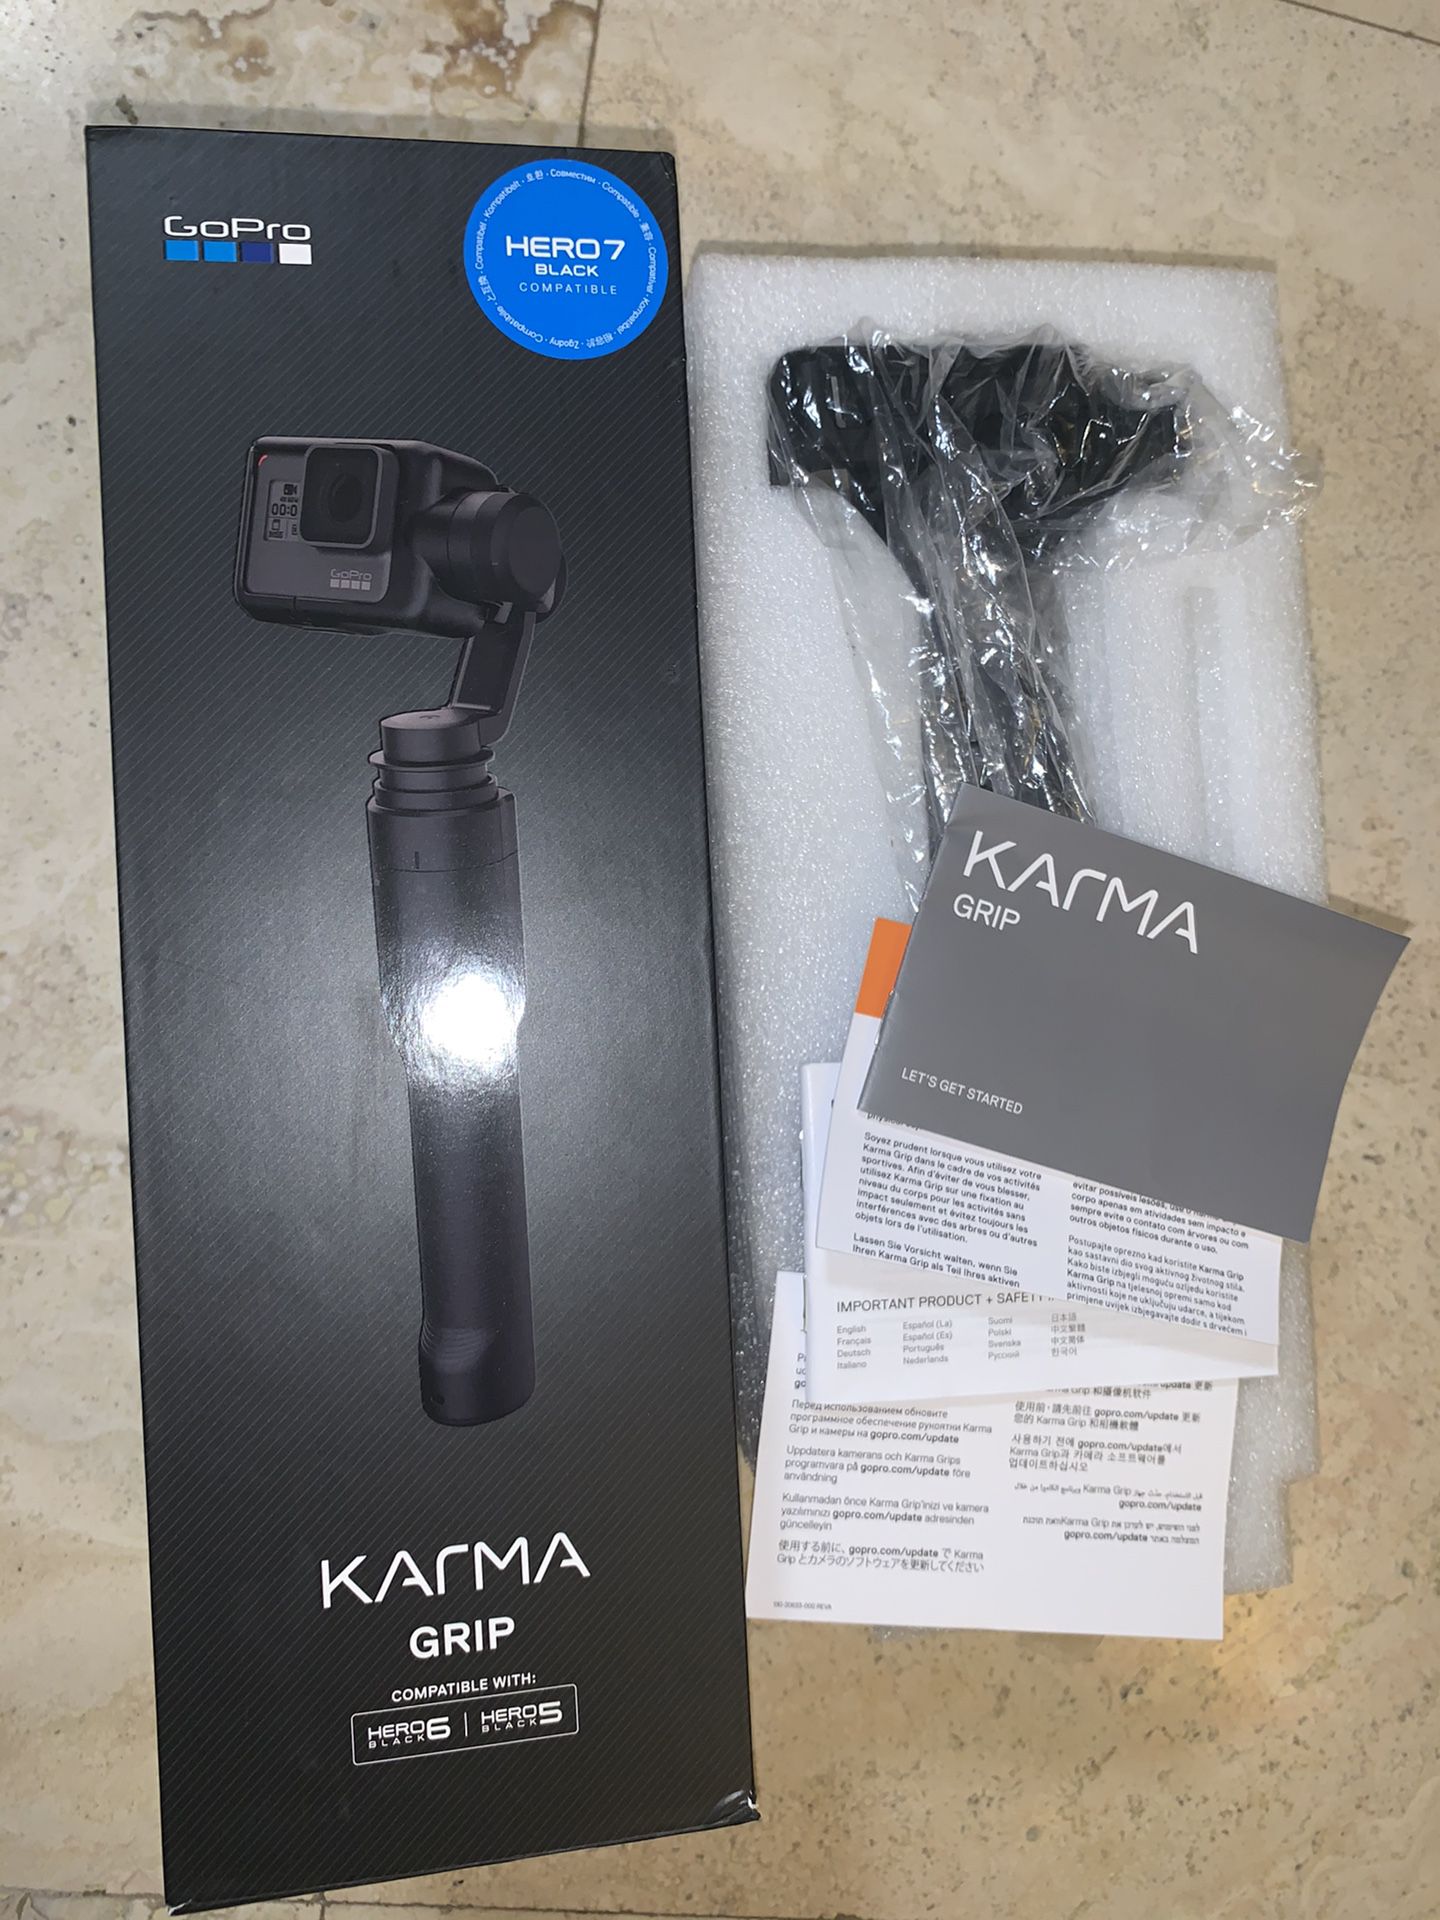 KARMA Grip for GoPro HERO 7/8 , Barely used